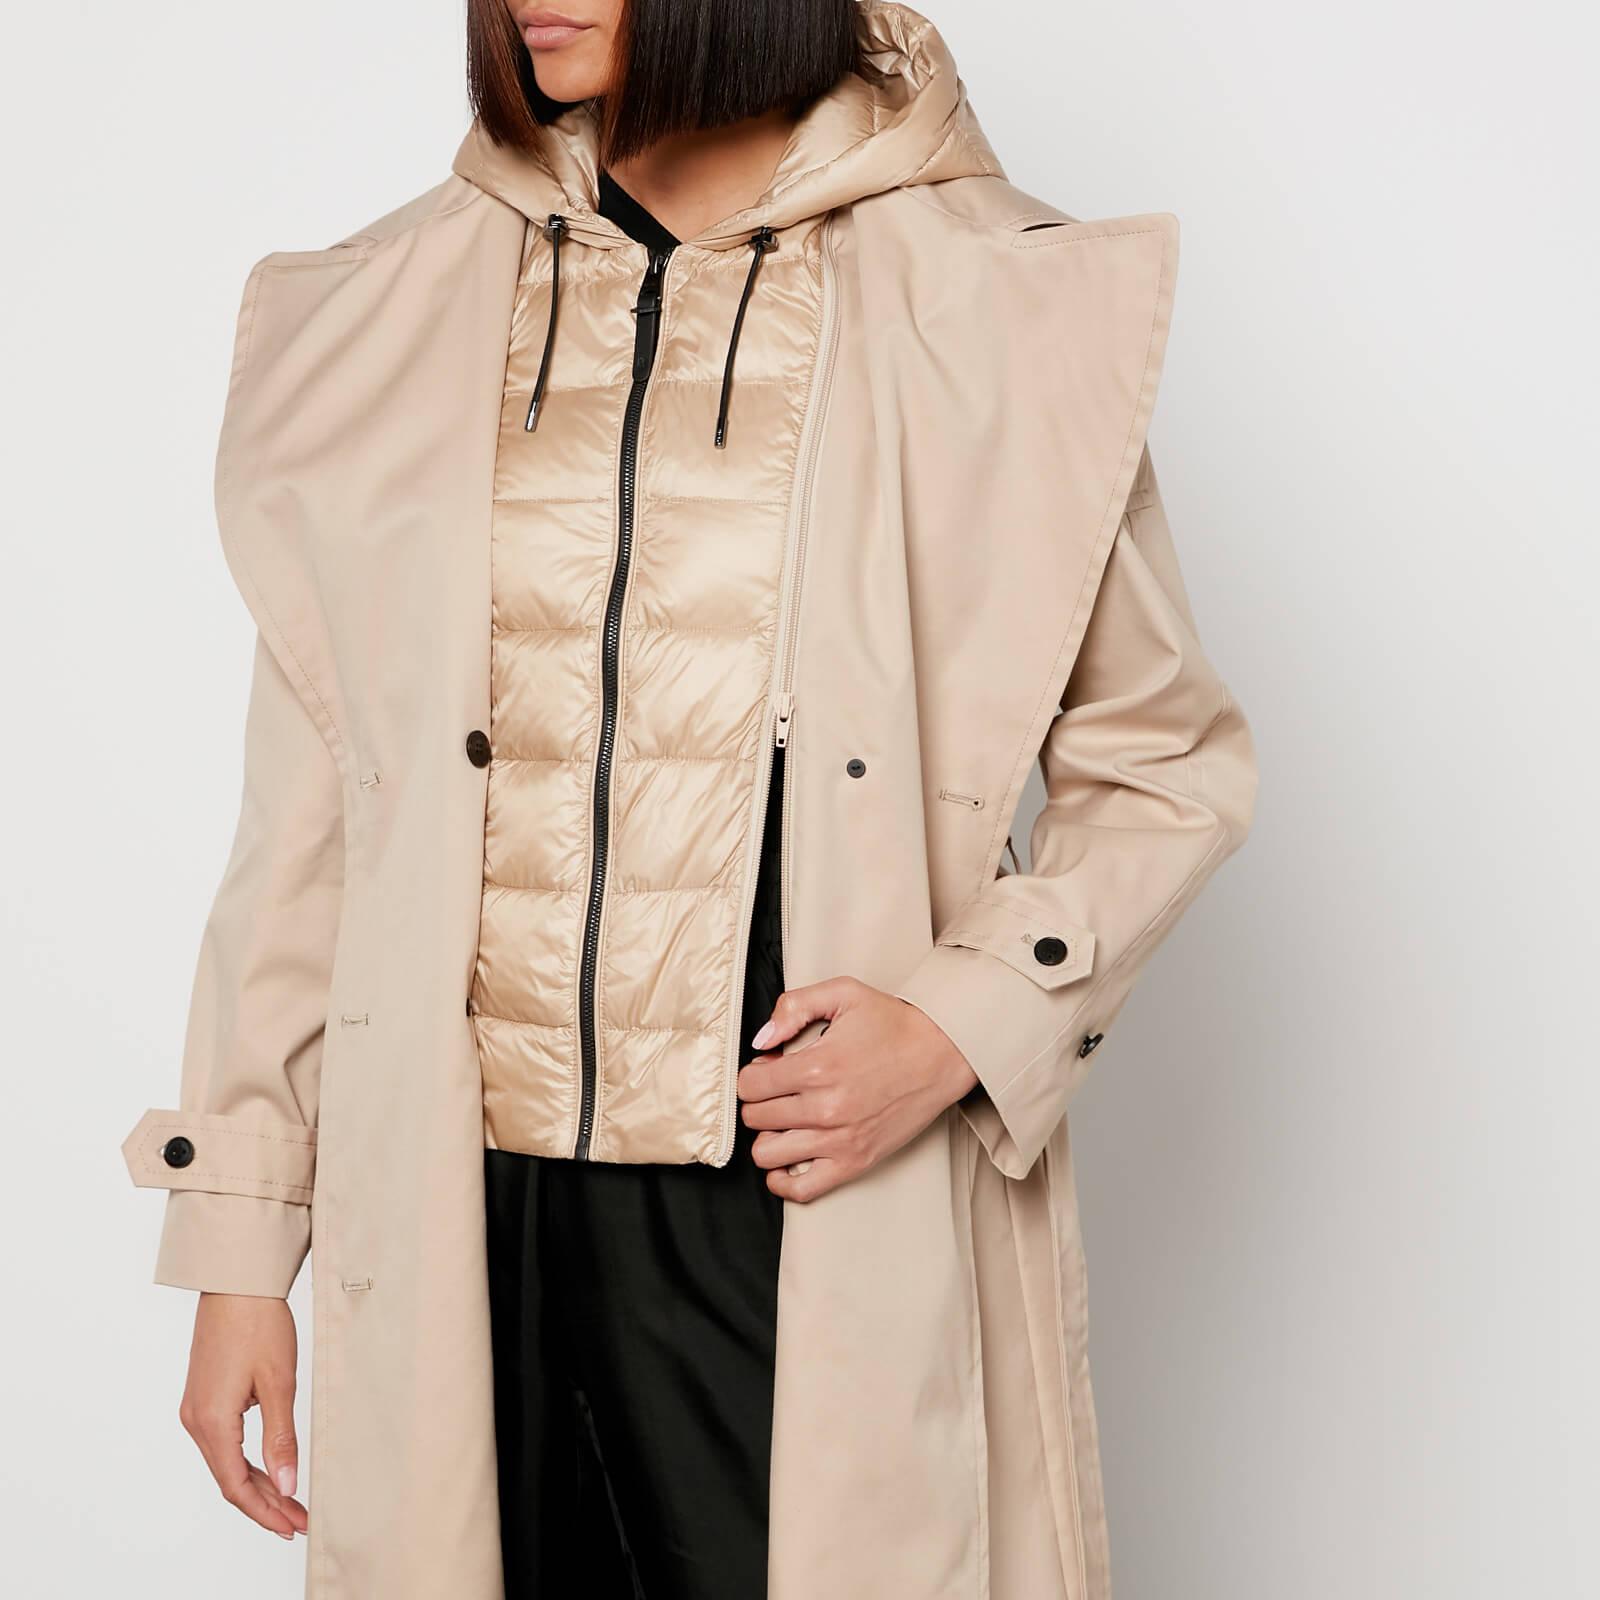 Mackage Trisha Trench Coat With Hood in Natural | Lyst